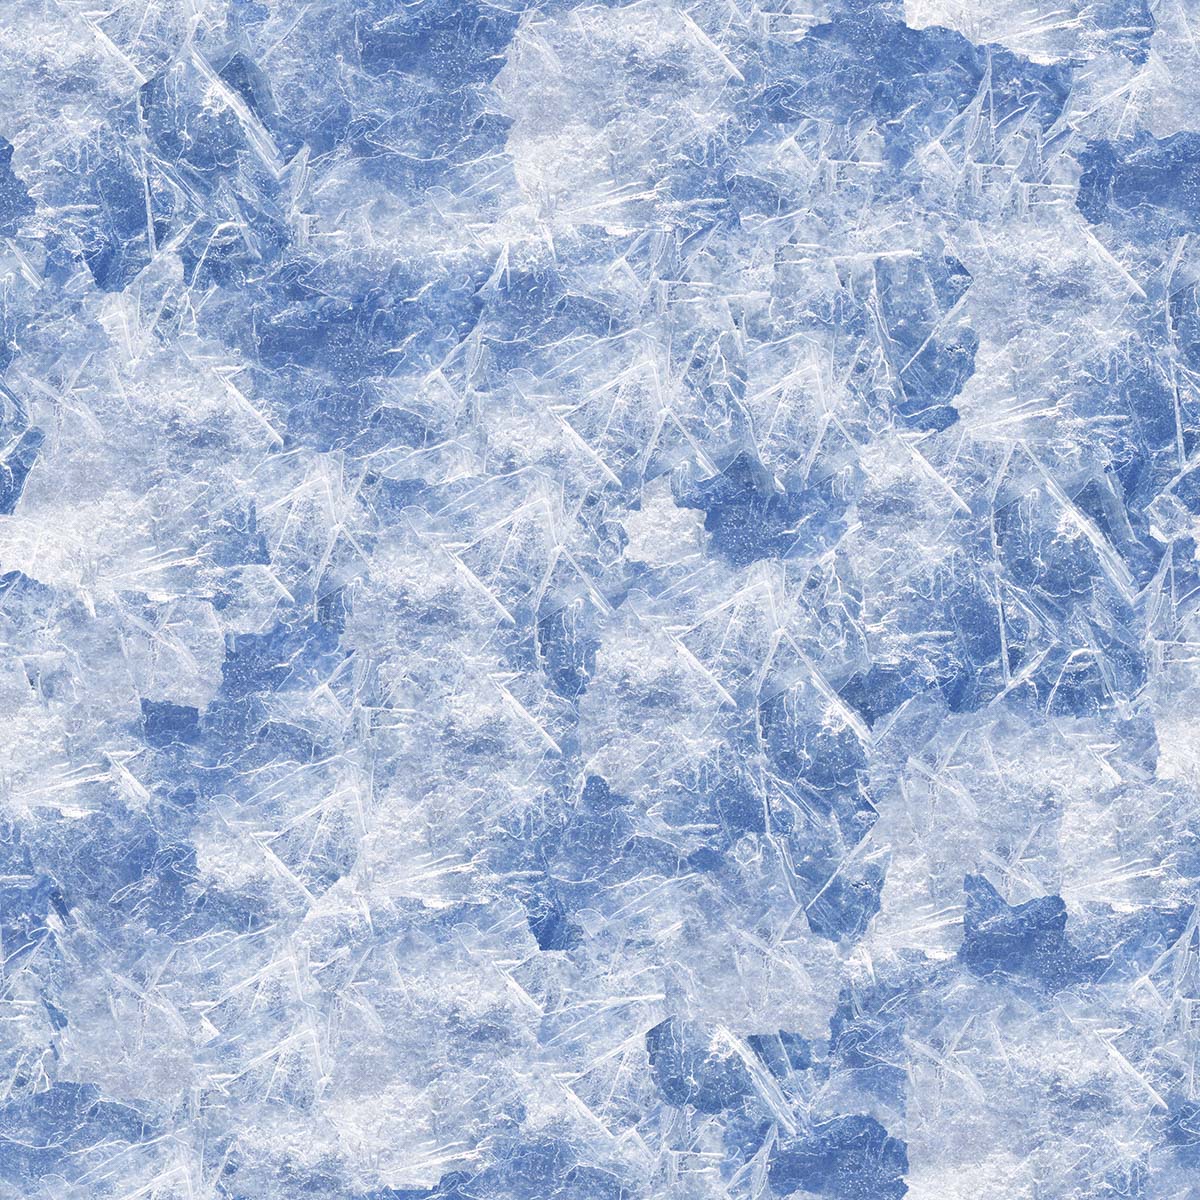 A blue and white background